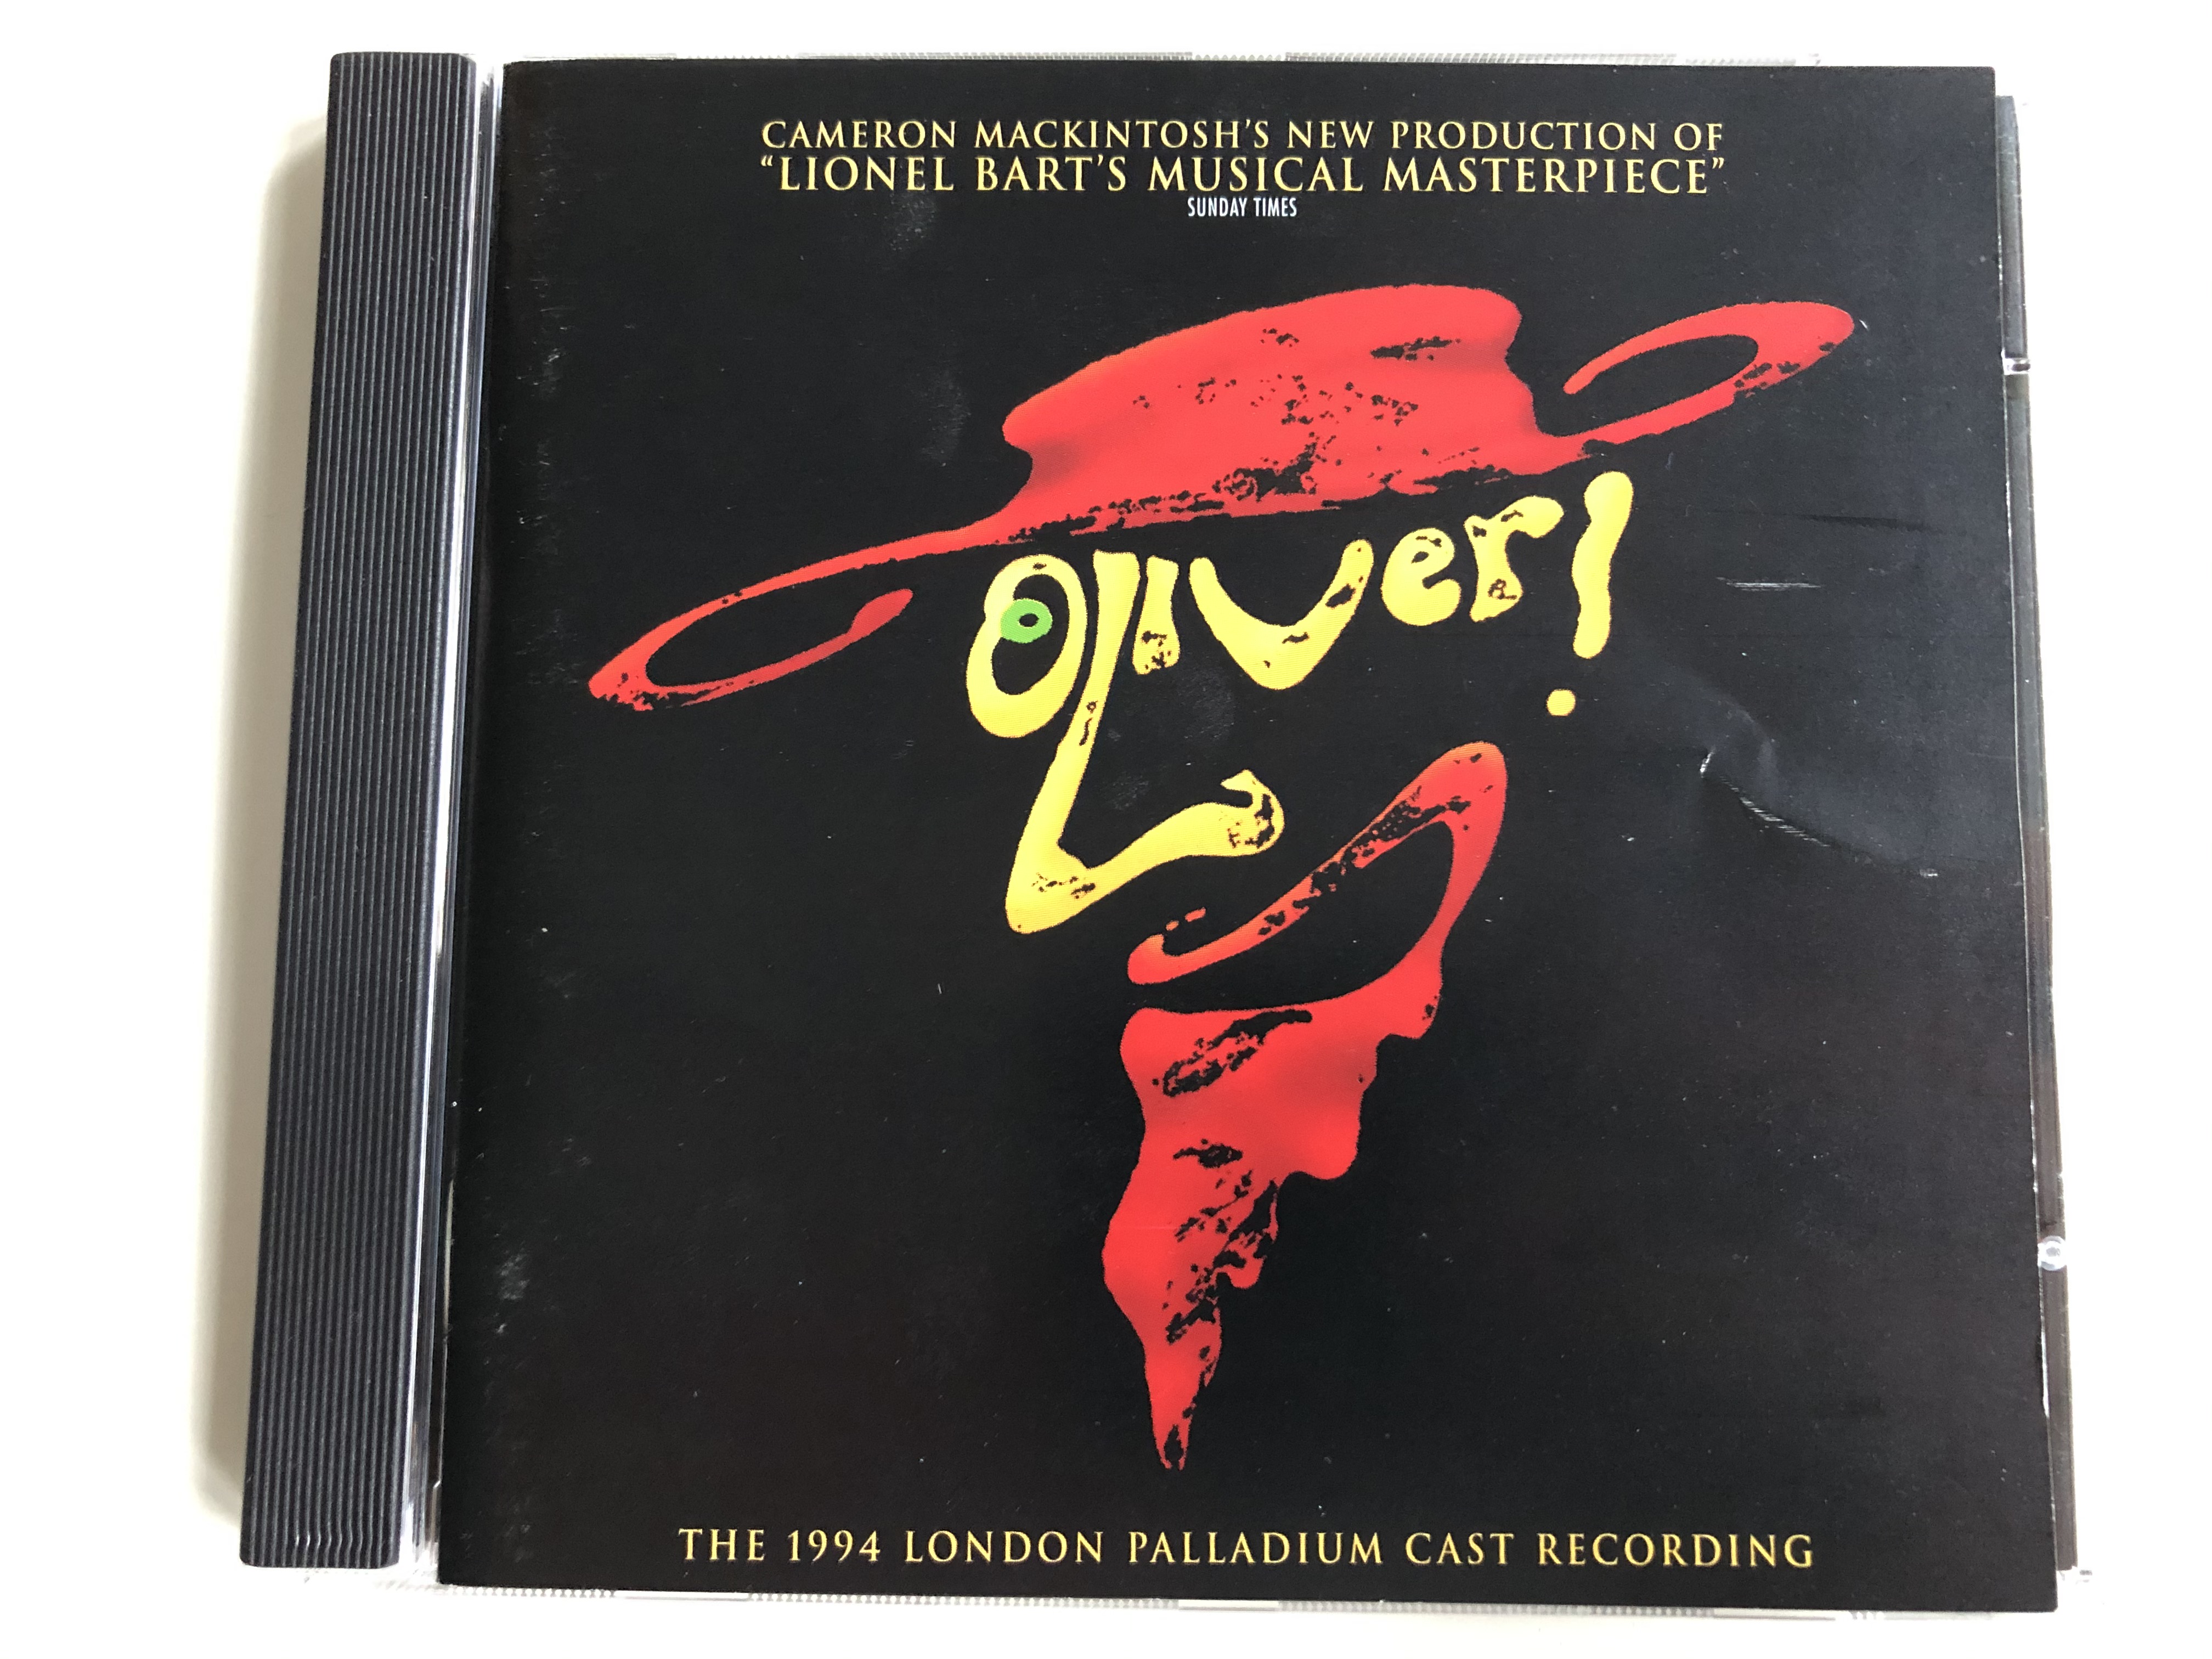 cameron-mackintosh-s-new-production-of-lionel-barts-musical-masterpiece-oliver-the-1994-london-palladium-cast-recording-first-night-records-audio-cd-1995-cast-cd-47-1-.jpg